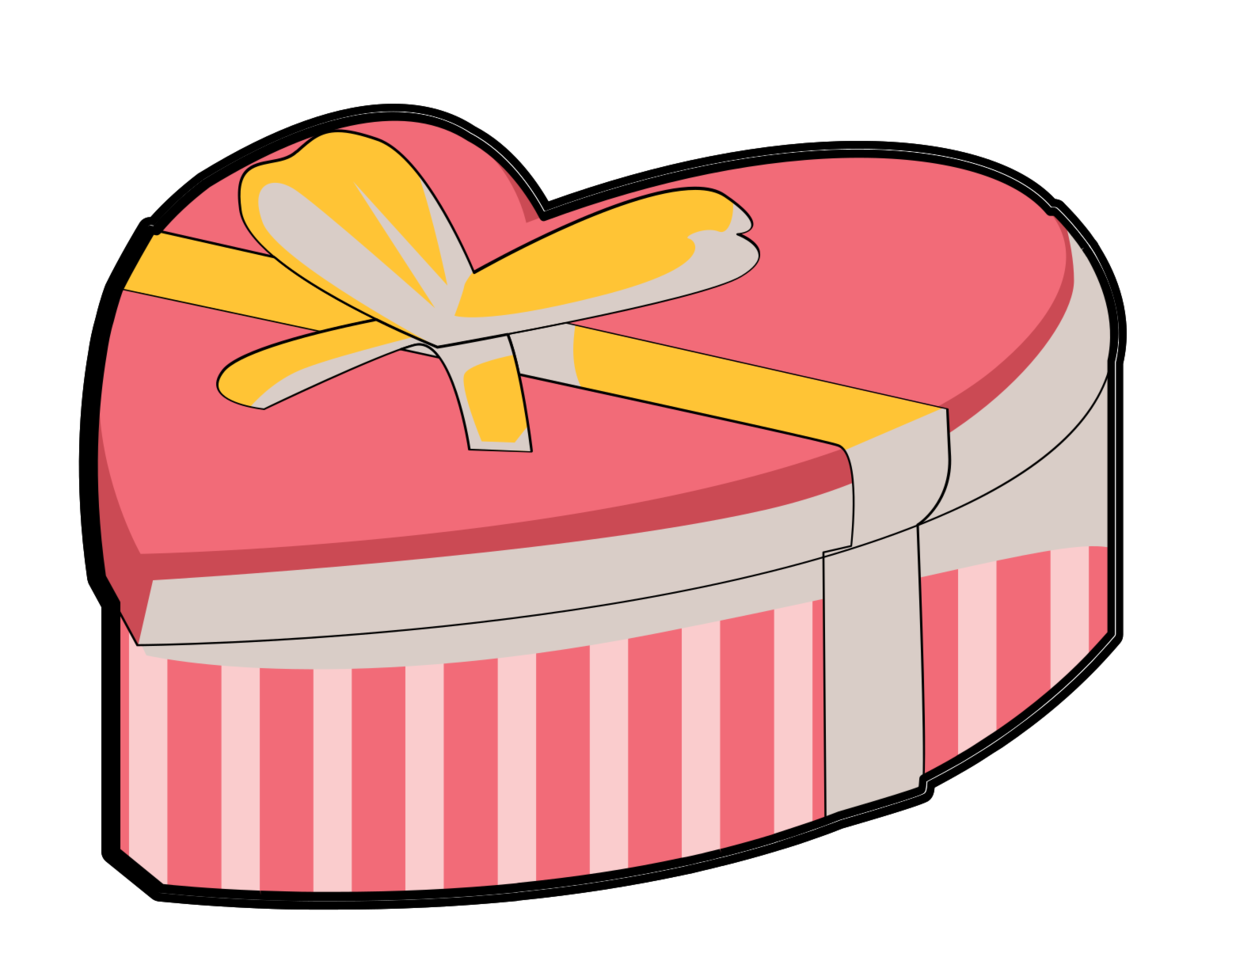 Box Heart Gift Free Transparent Image HQ PNG Image